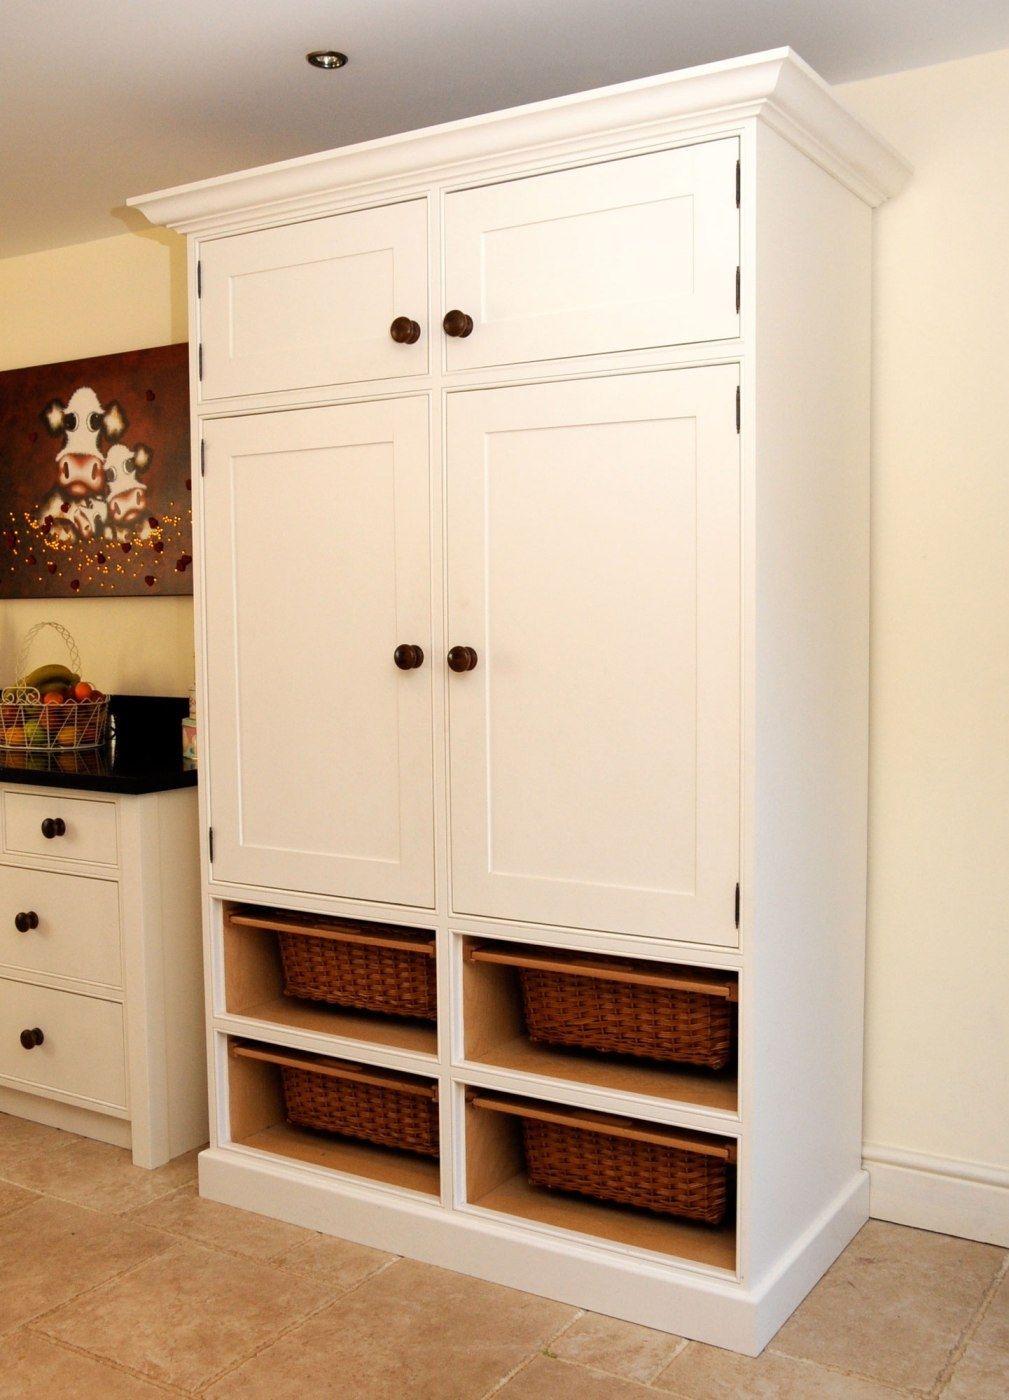 Lowes Free Standing Kitchen Cabinets Kitchens Pinterest More Regarding Free Standing Storage Cupboards (View 2 of 12)